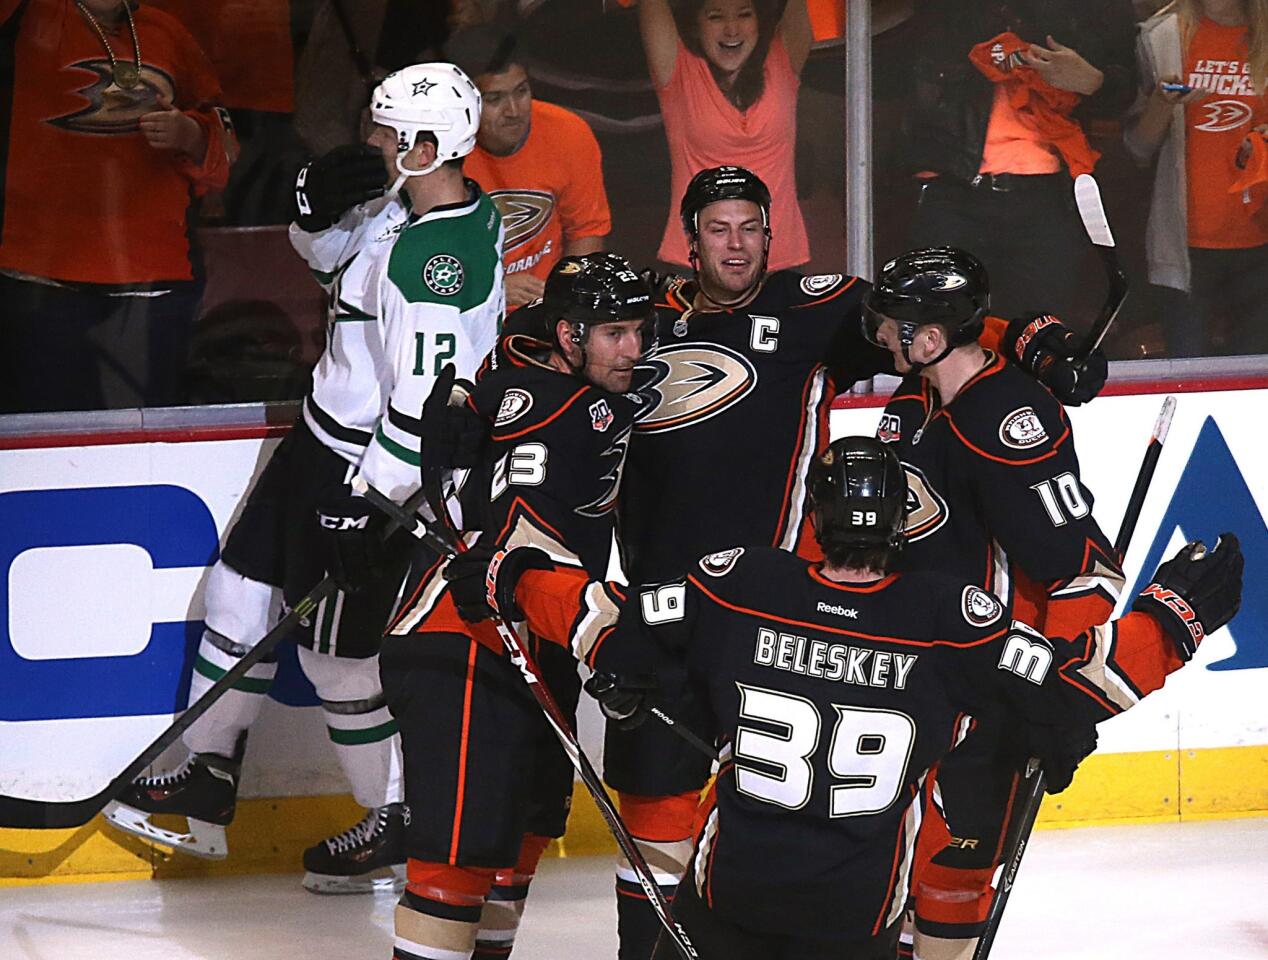 The Ducks celebrate following a goal by captain Ryan Getzlaf, top center, during the first period of Game 1 of the Western Conference quarterfinals against the Dallas Stars at Honda Center.